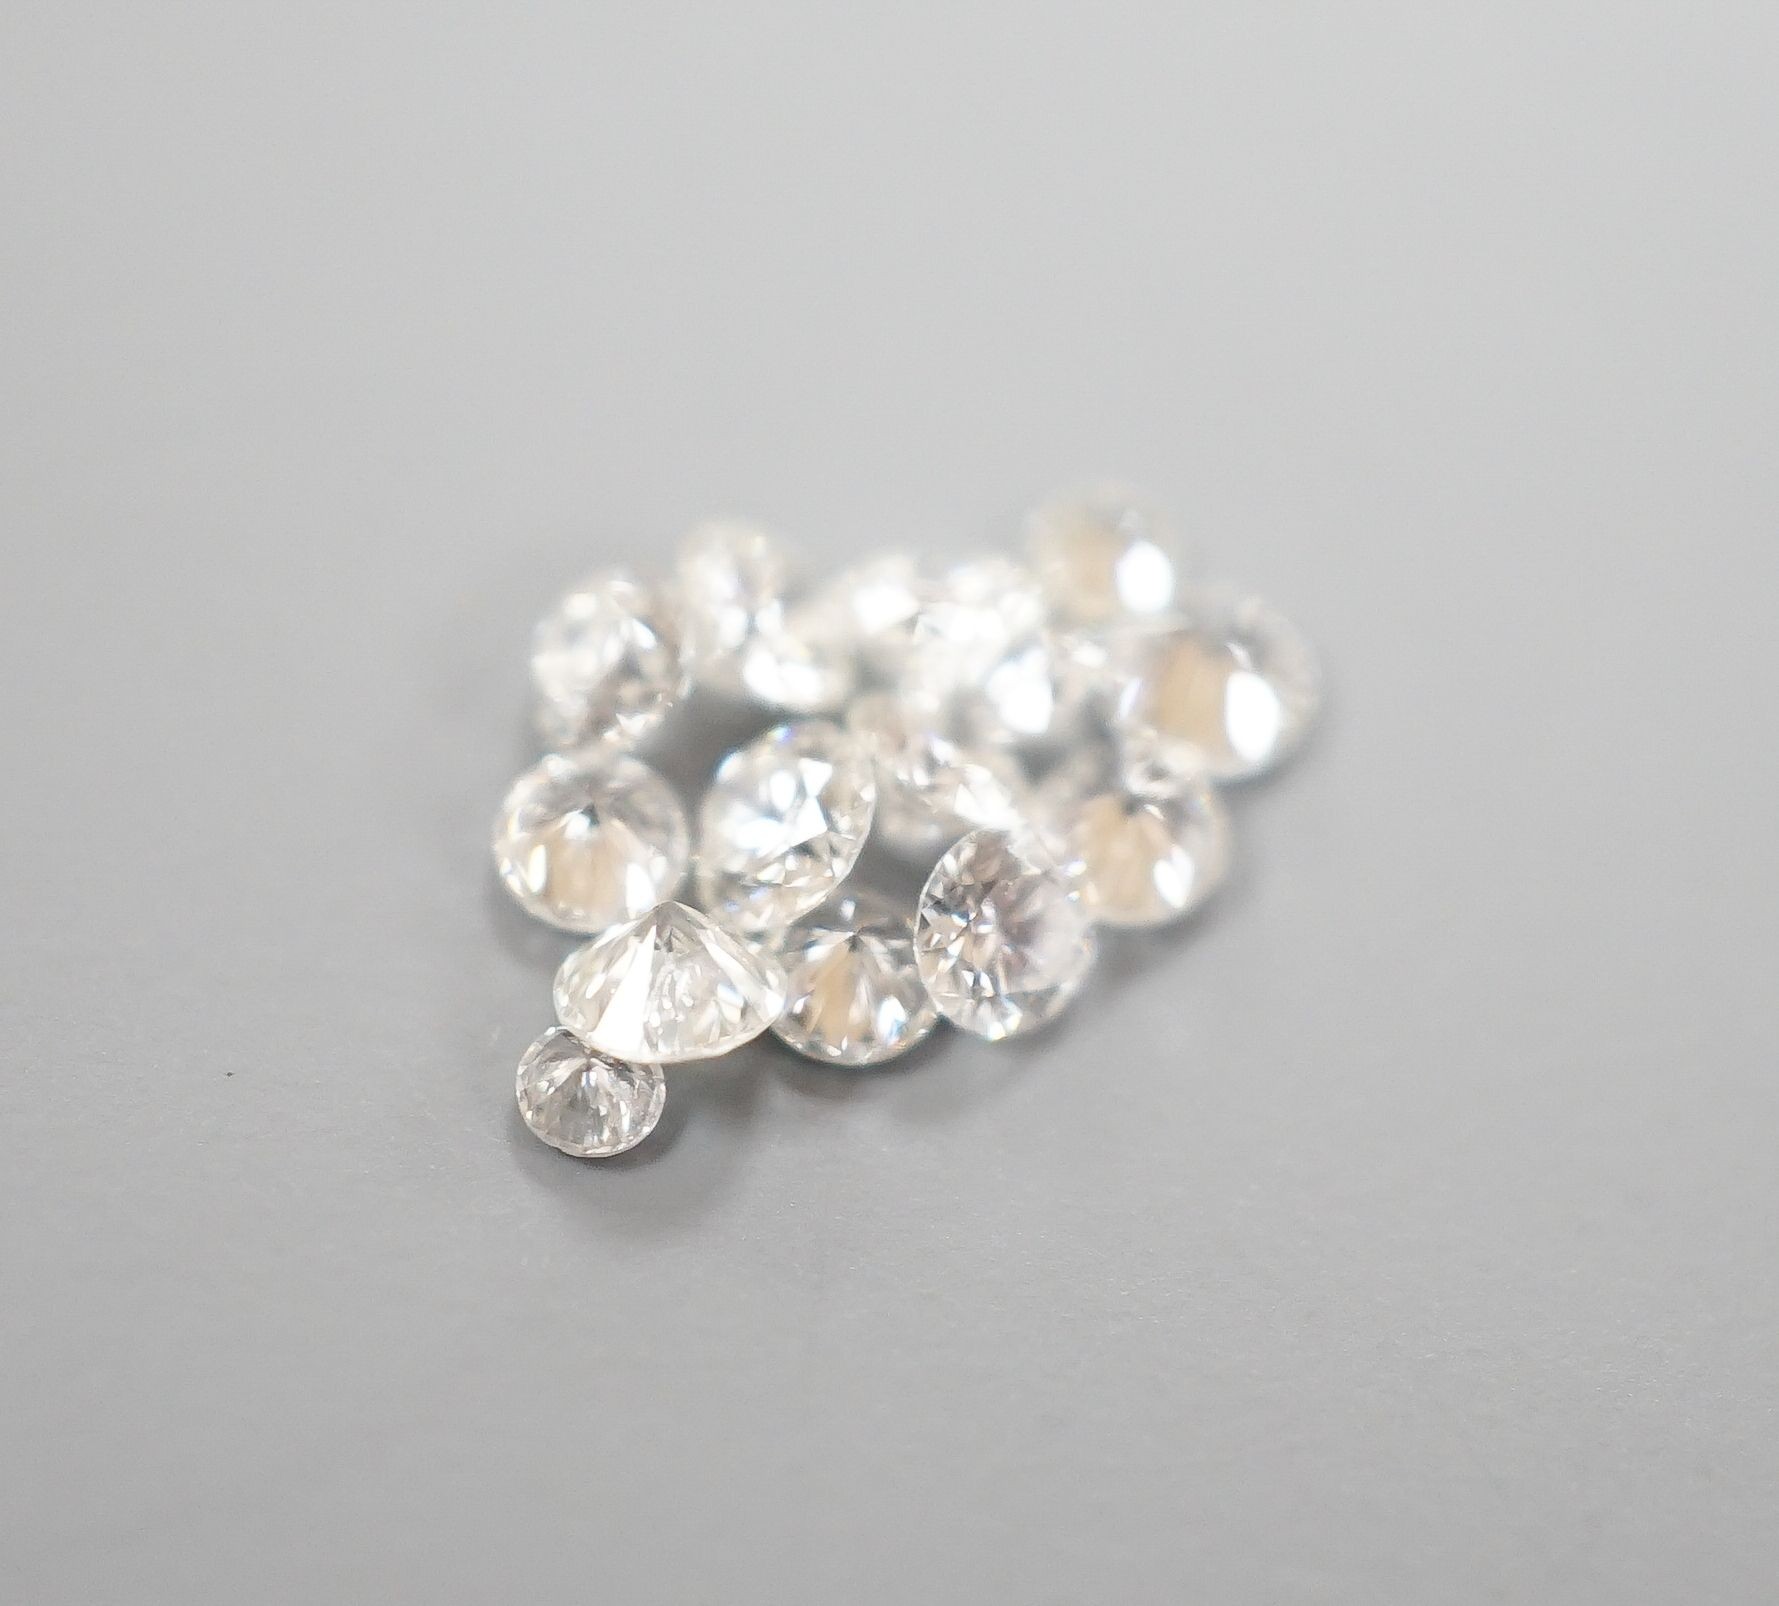 Fourteen small unmounted cut diamonds, total weight approx. 0.58ct.